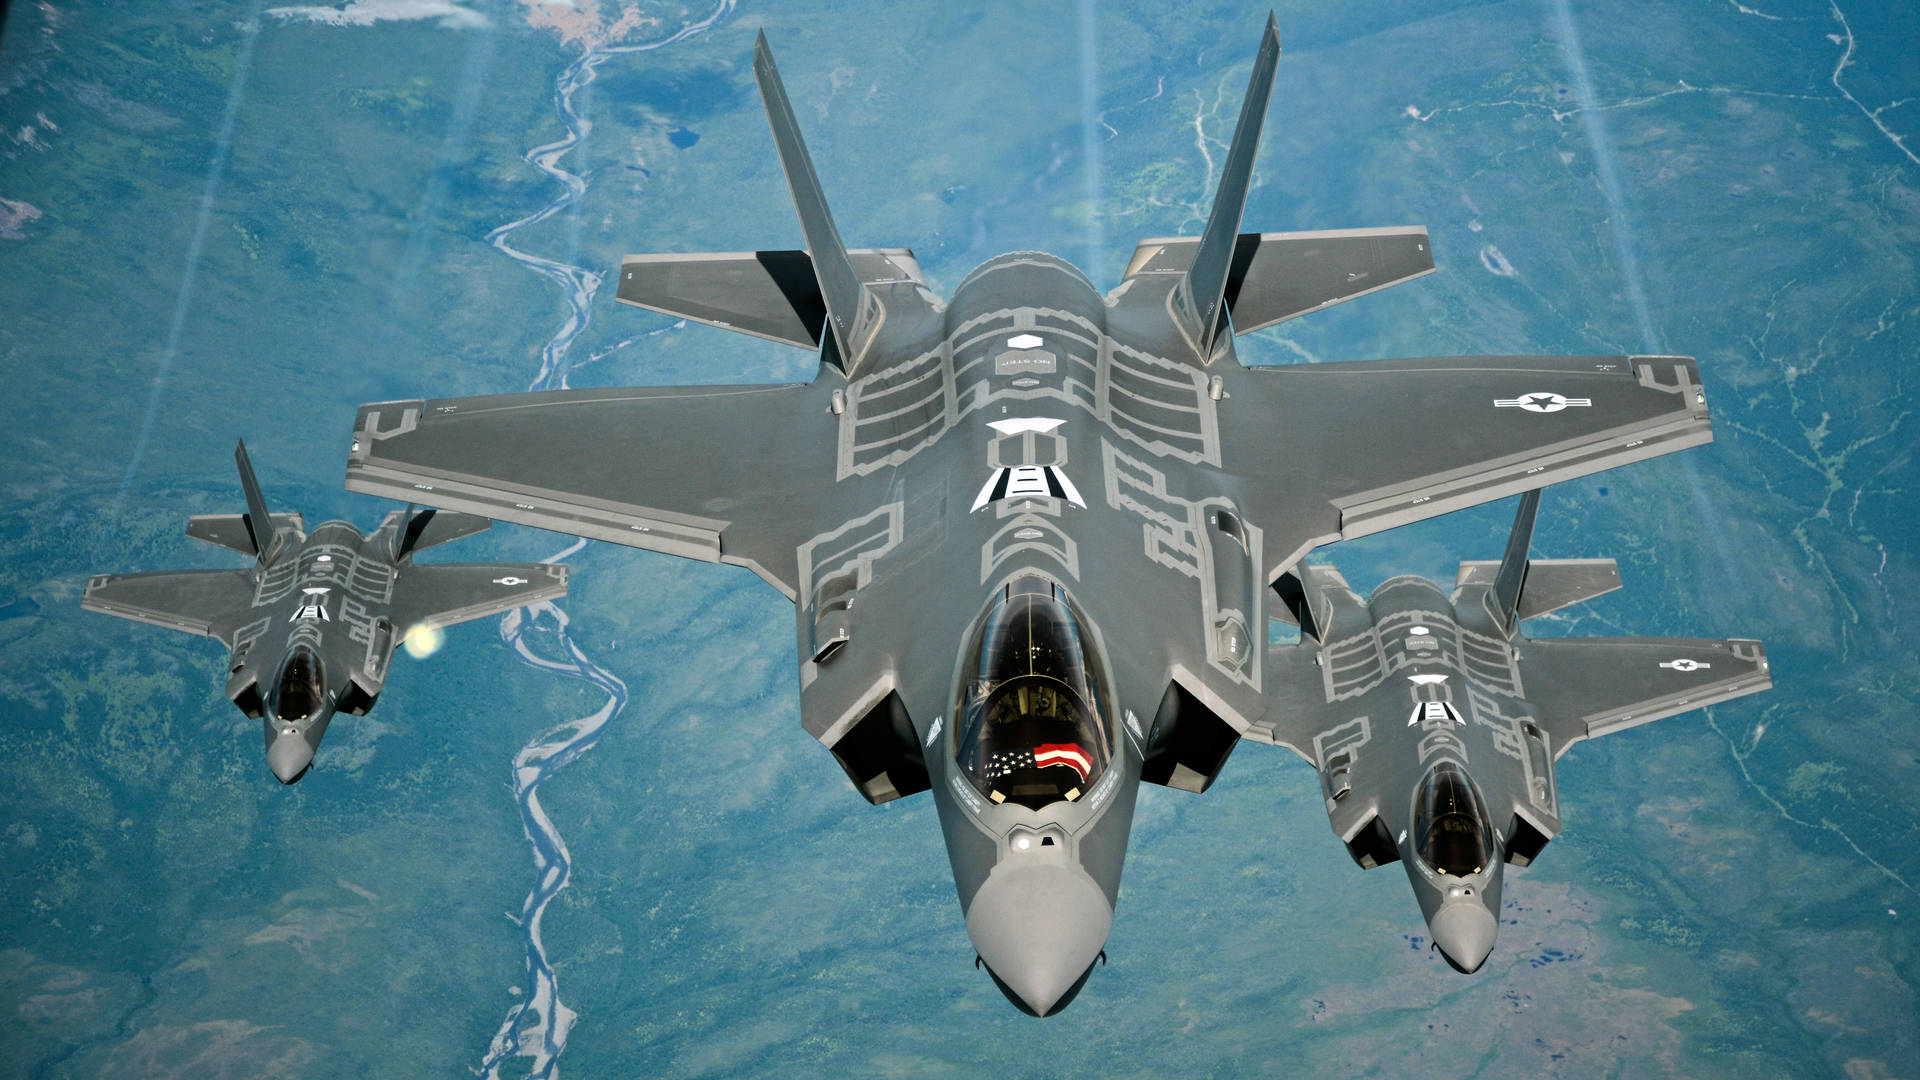 The F-35a Jet Fighter Background